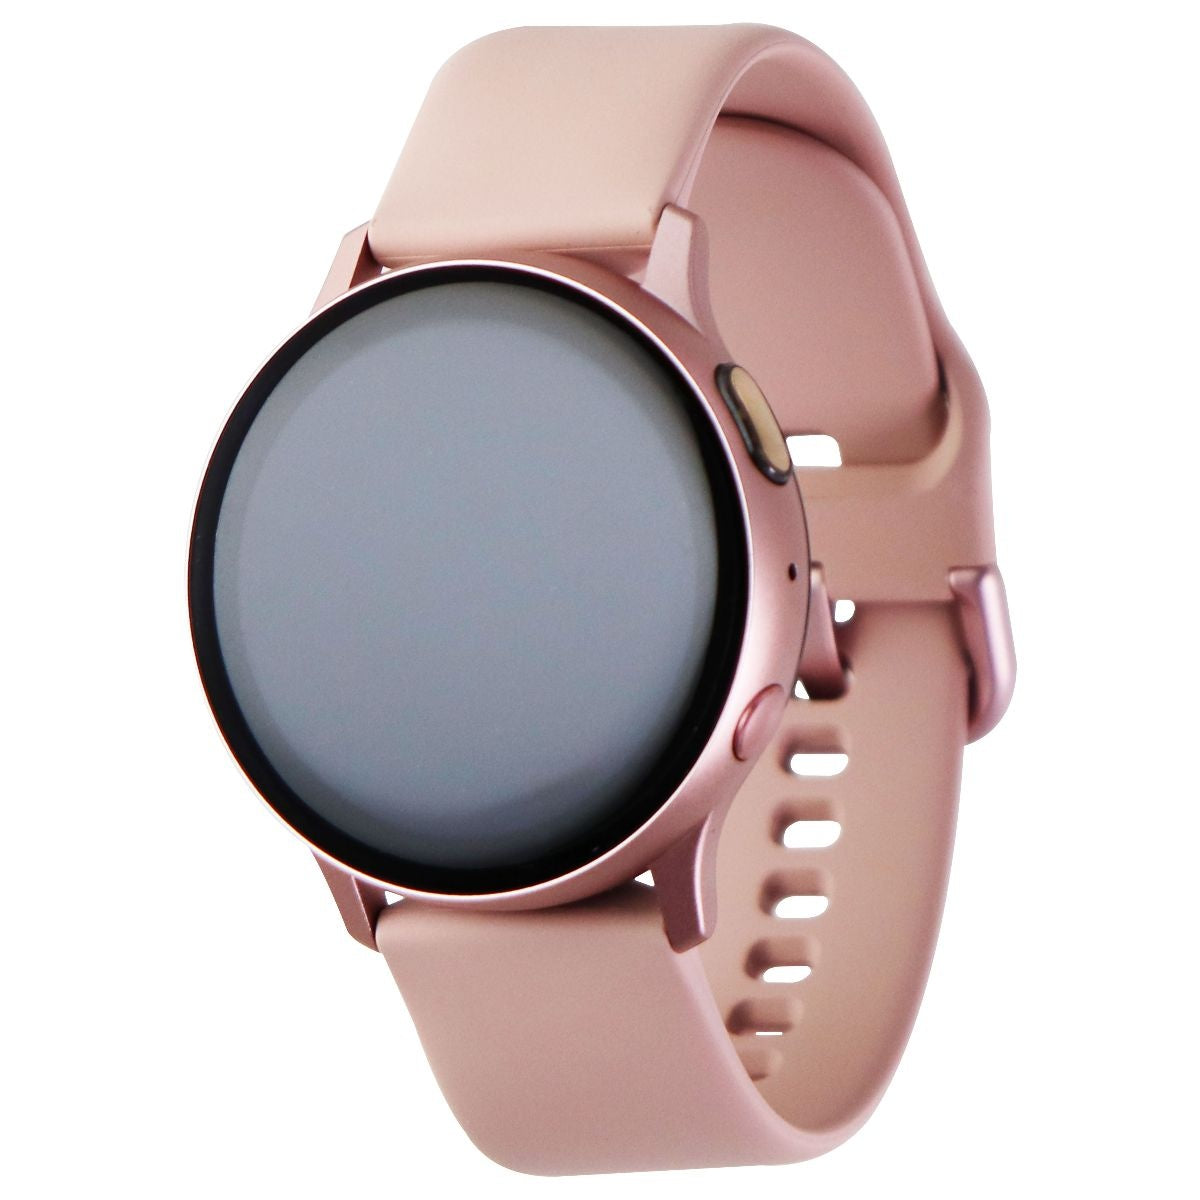 Samsung Galaxy Watch Active2 (40mm) Smartwatch - Pink Gold (Bluetooth/GPS Only)